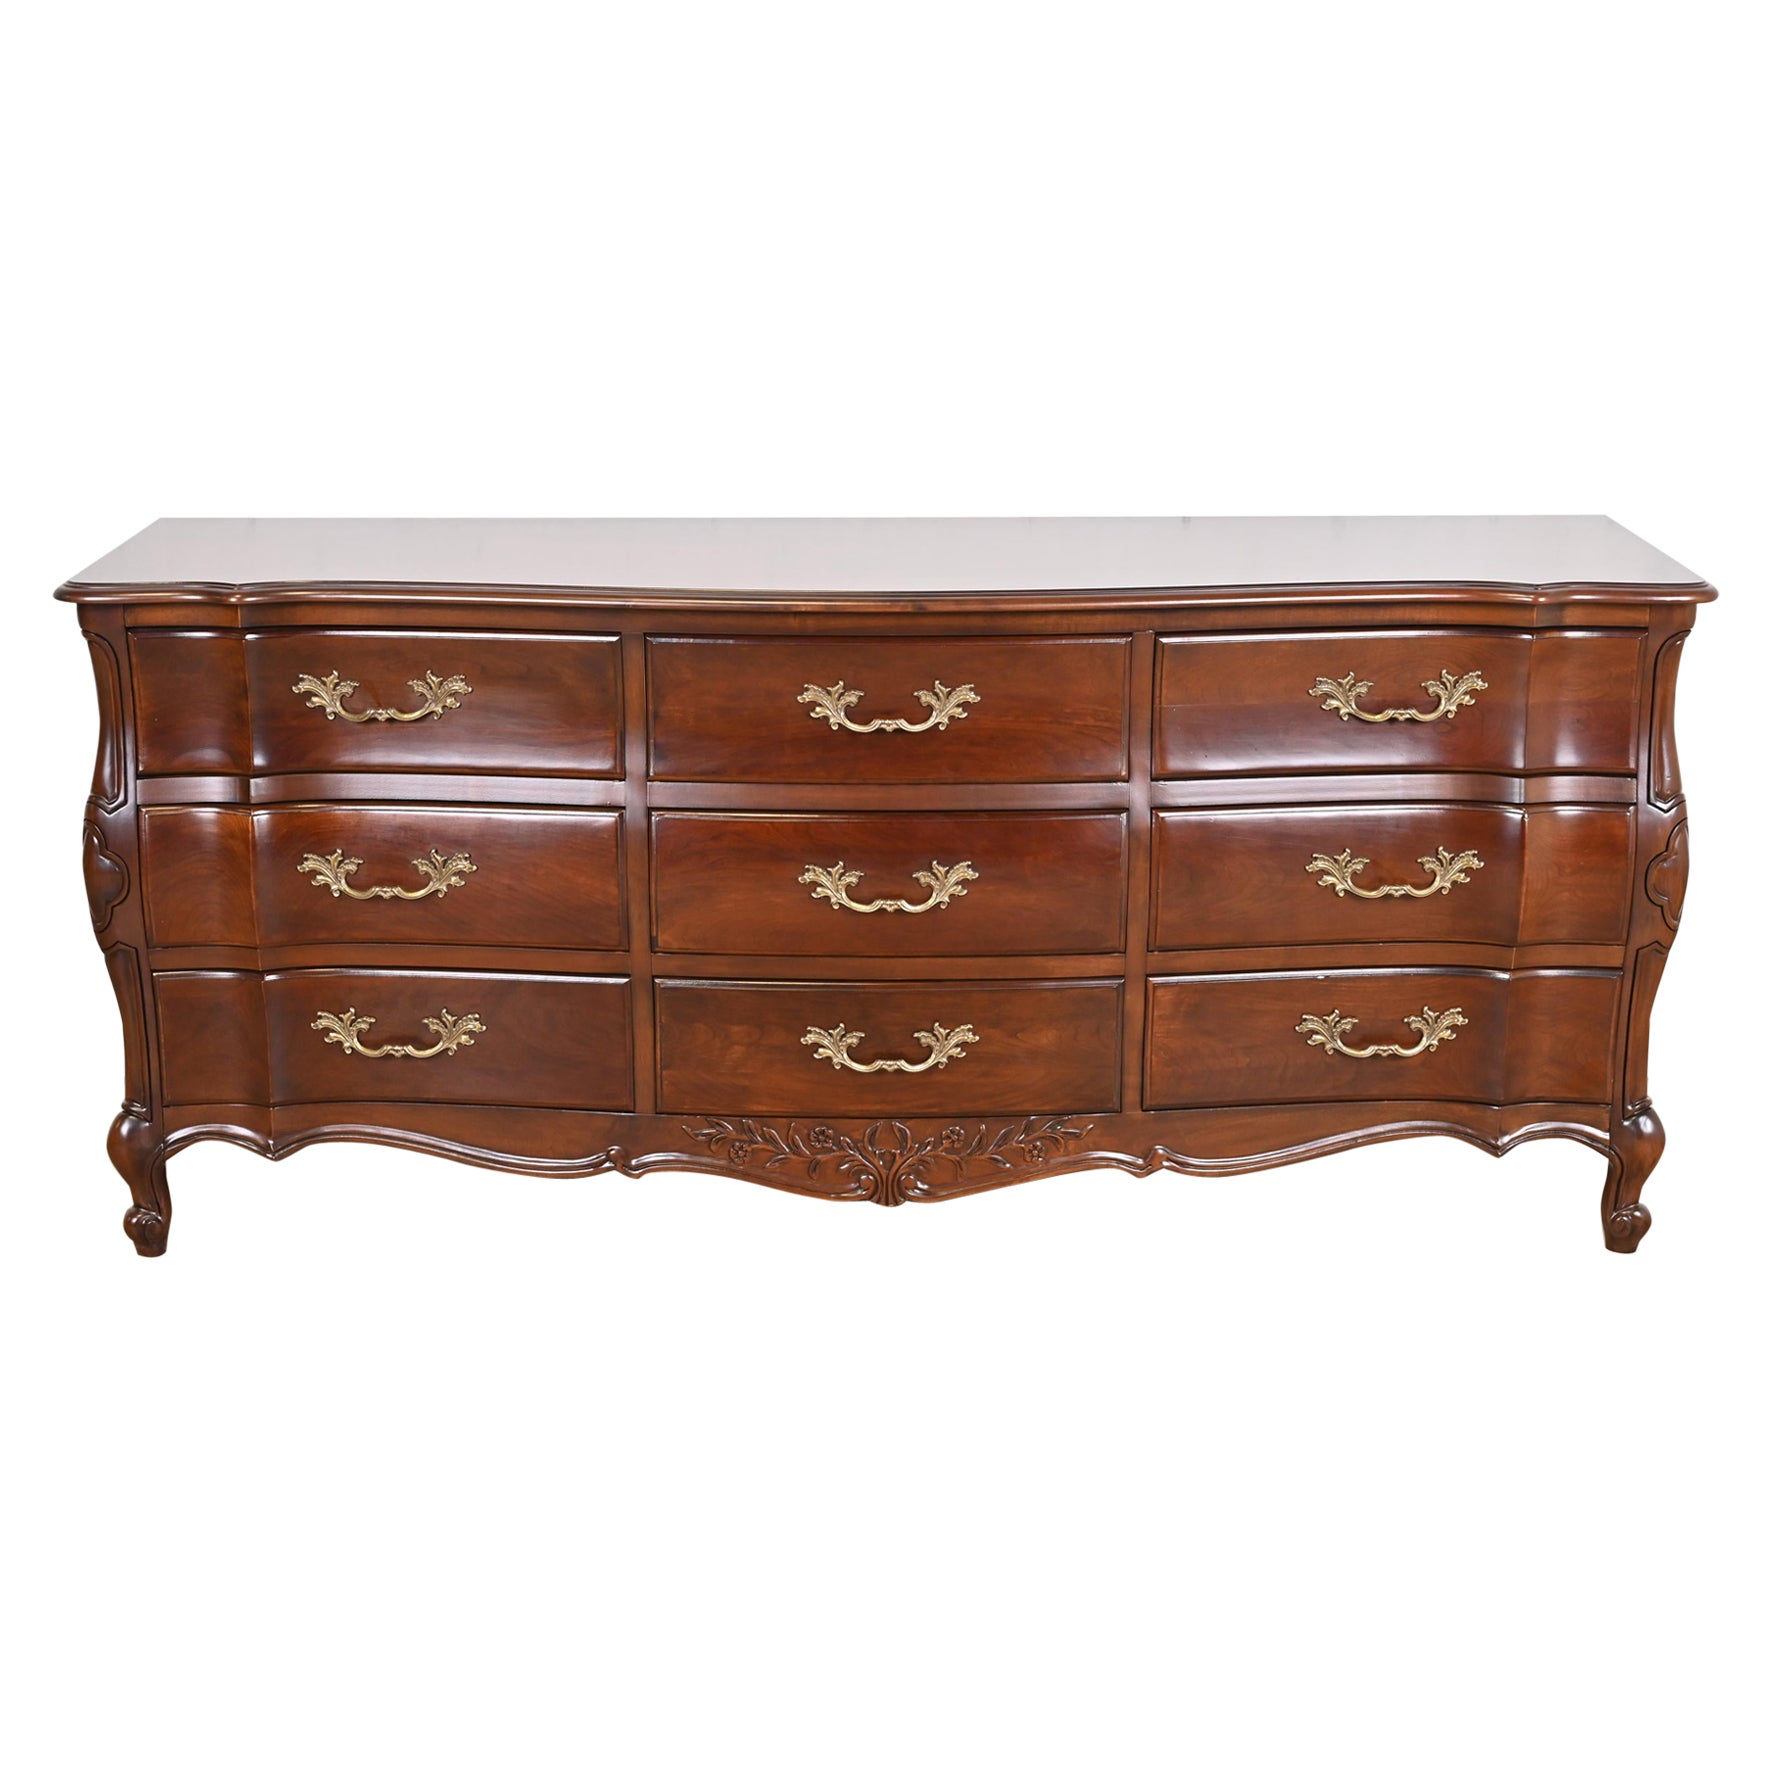 French Provincial Louis XV Cherry Wood Dresser by White Furniture, Refinished For Sale